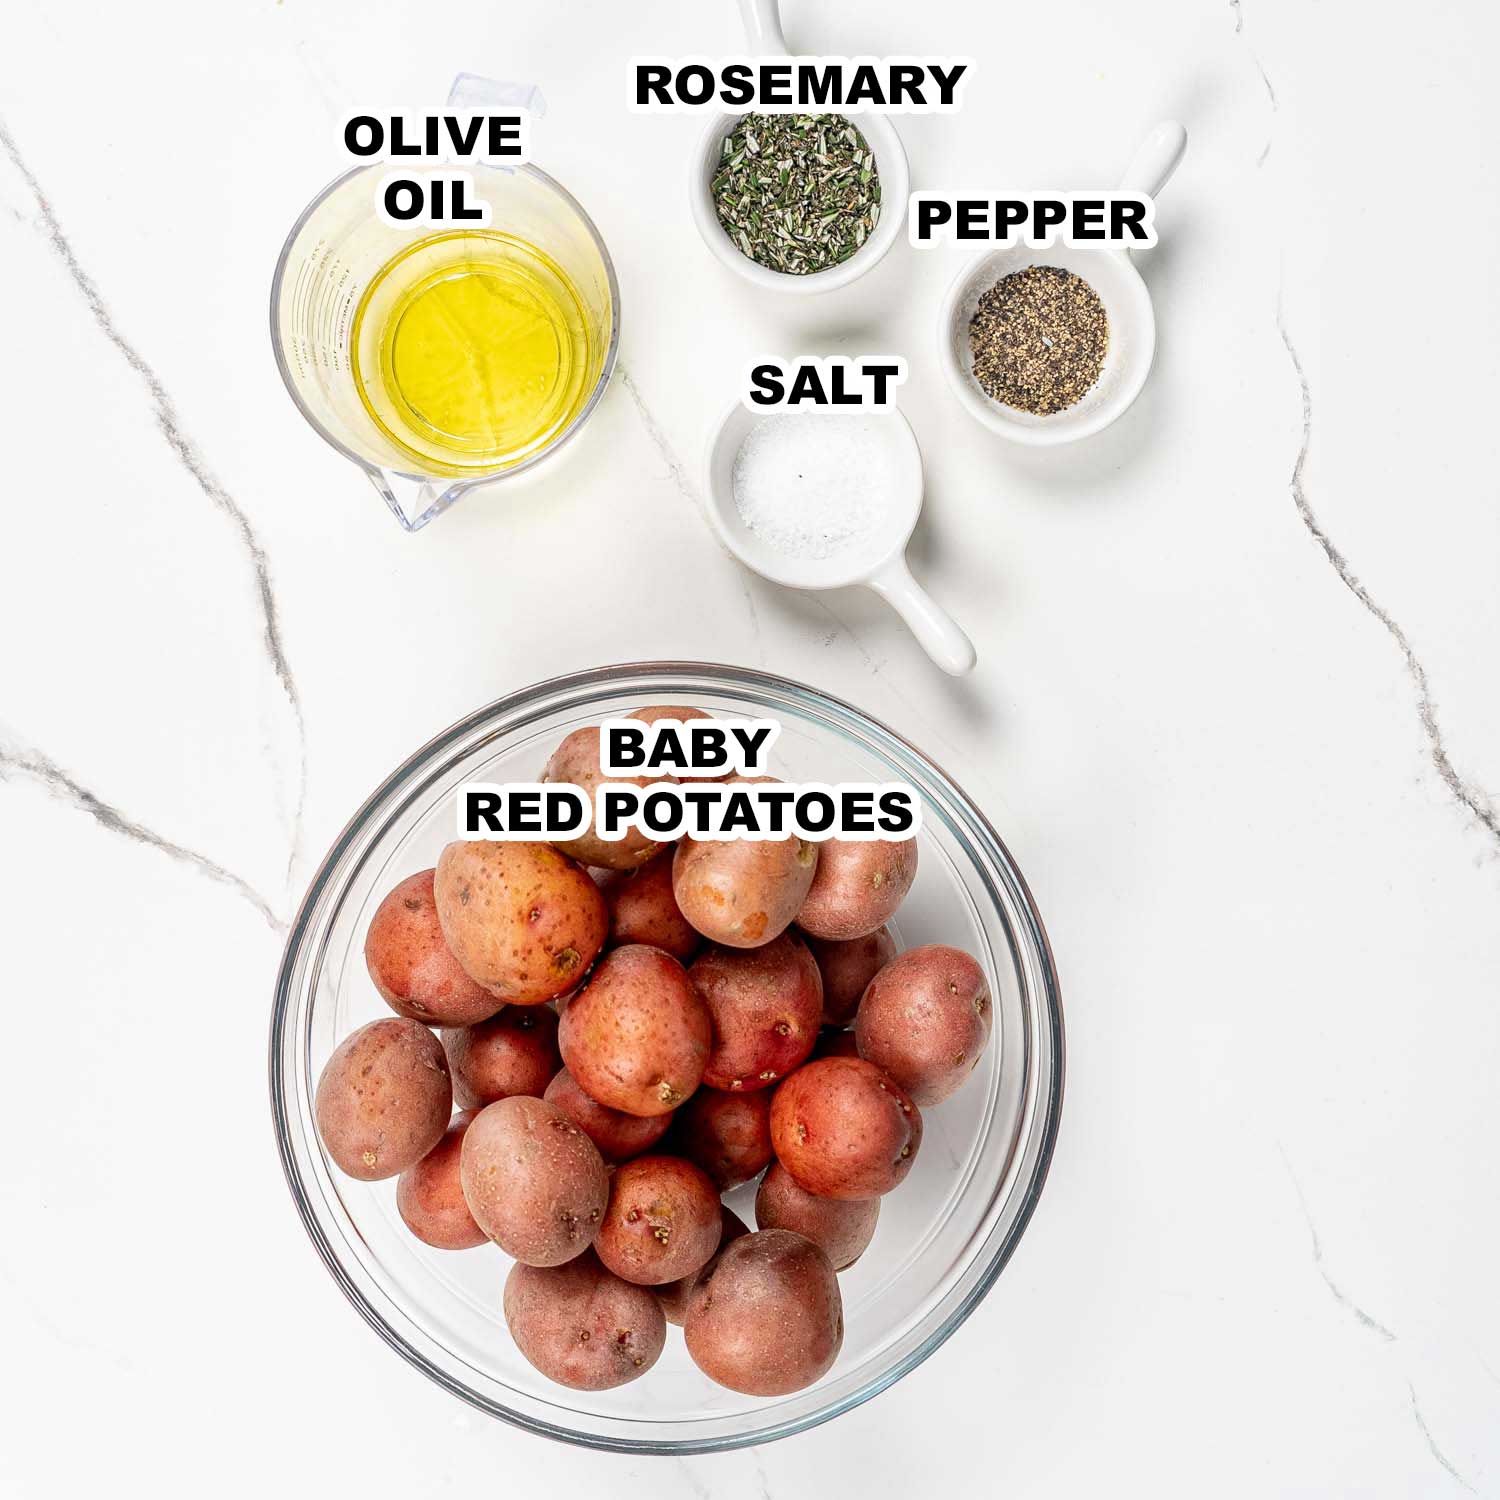 ingredients needed to make rosemary smashed potatoes.